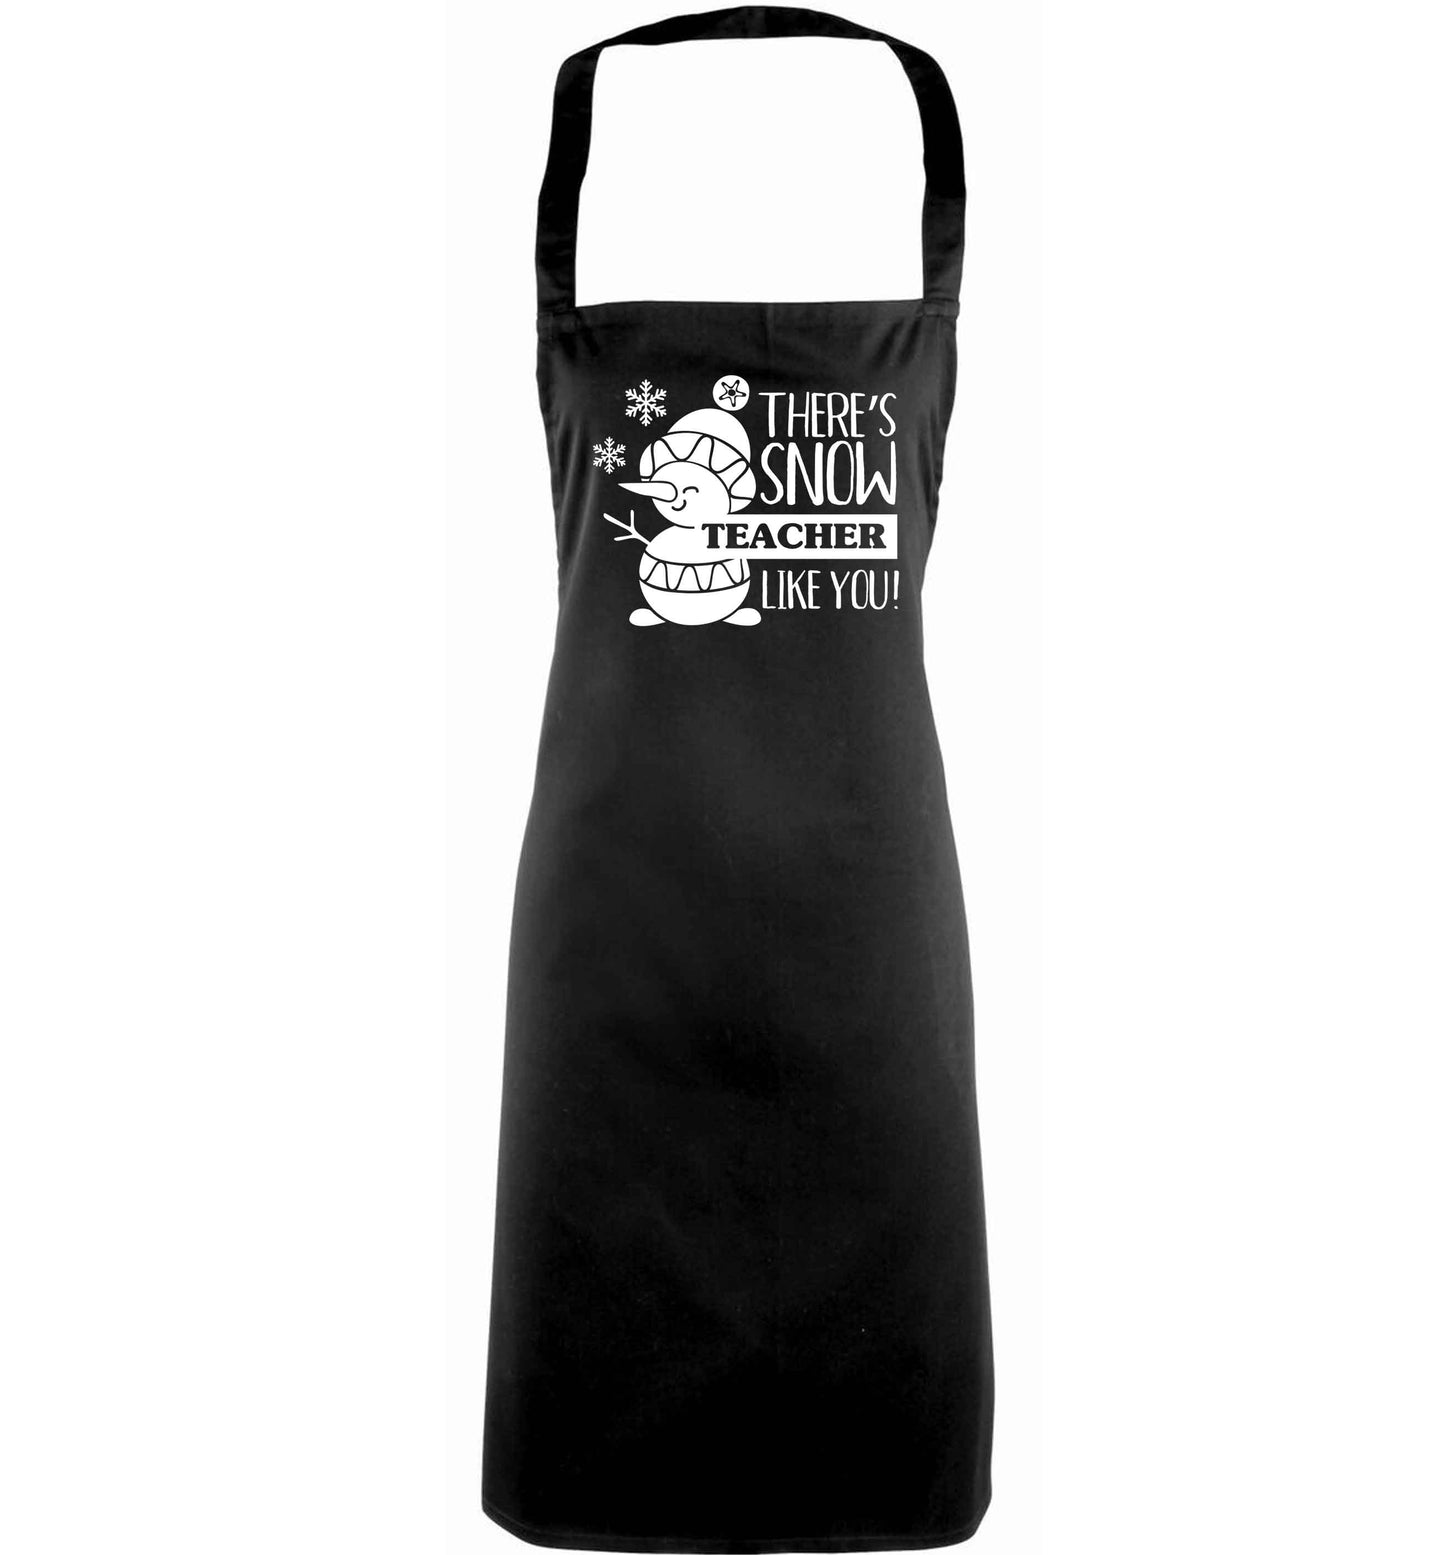 There's snow teacher like you adults black apron